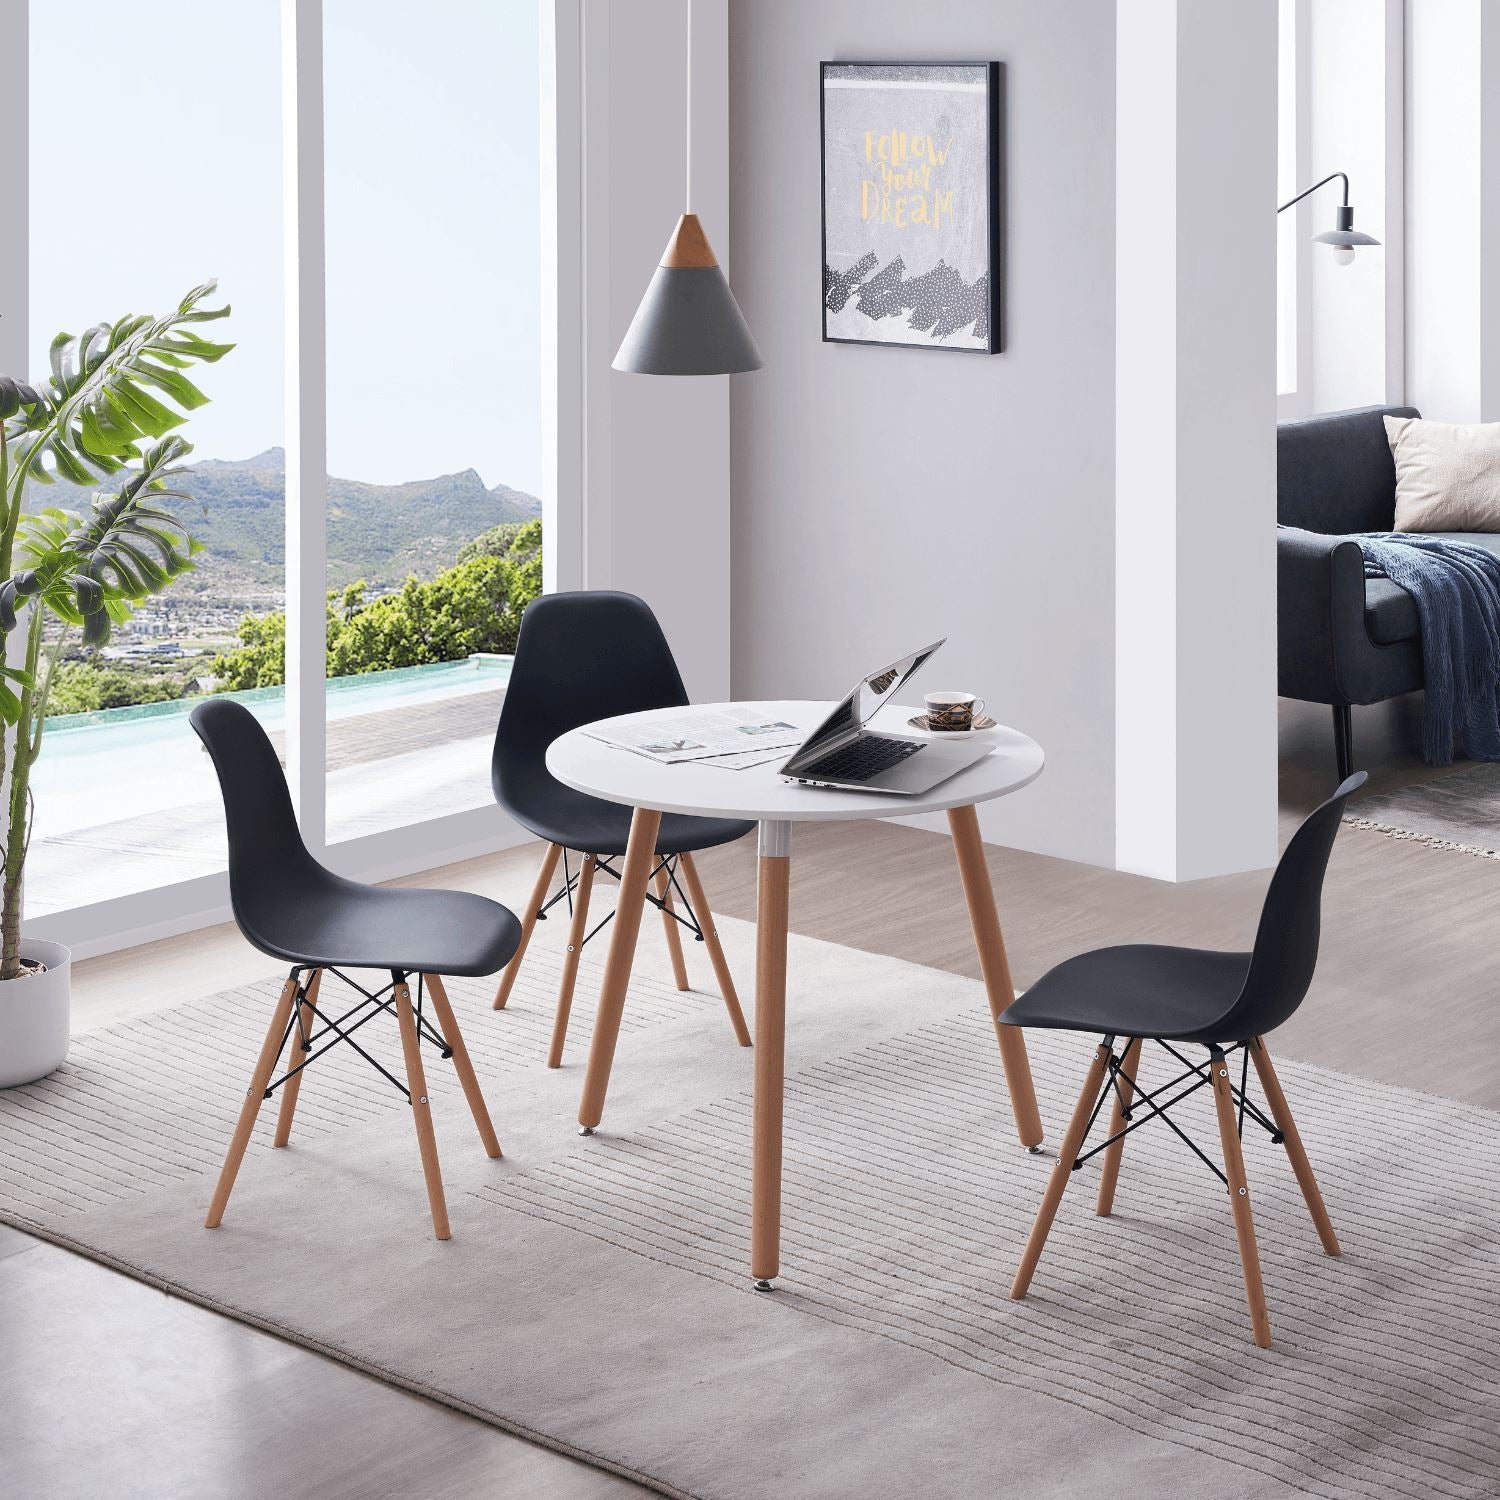 | 4 Furniture Valyou - Chair of Set Valmes